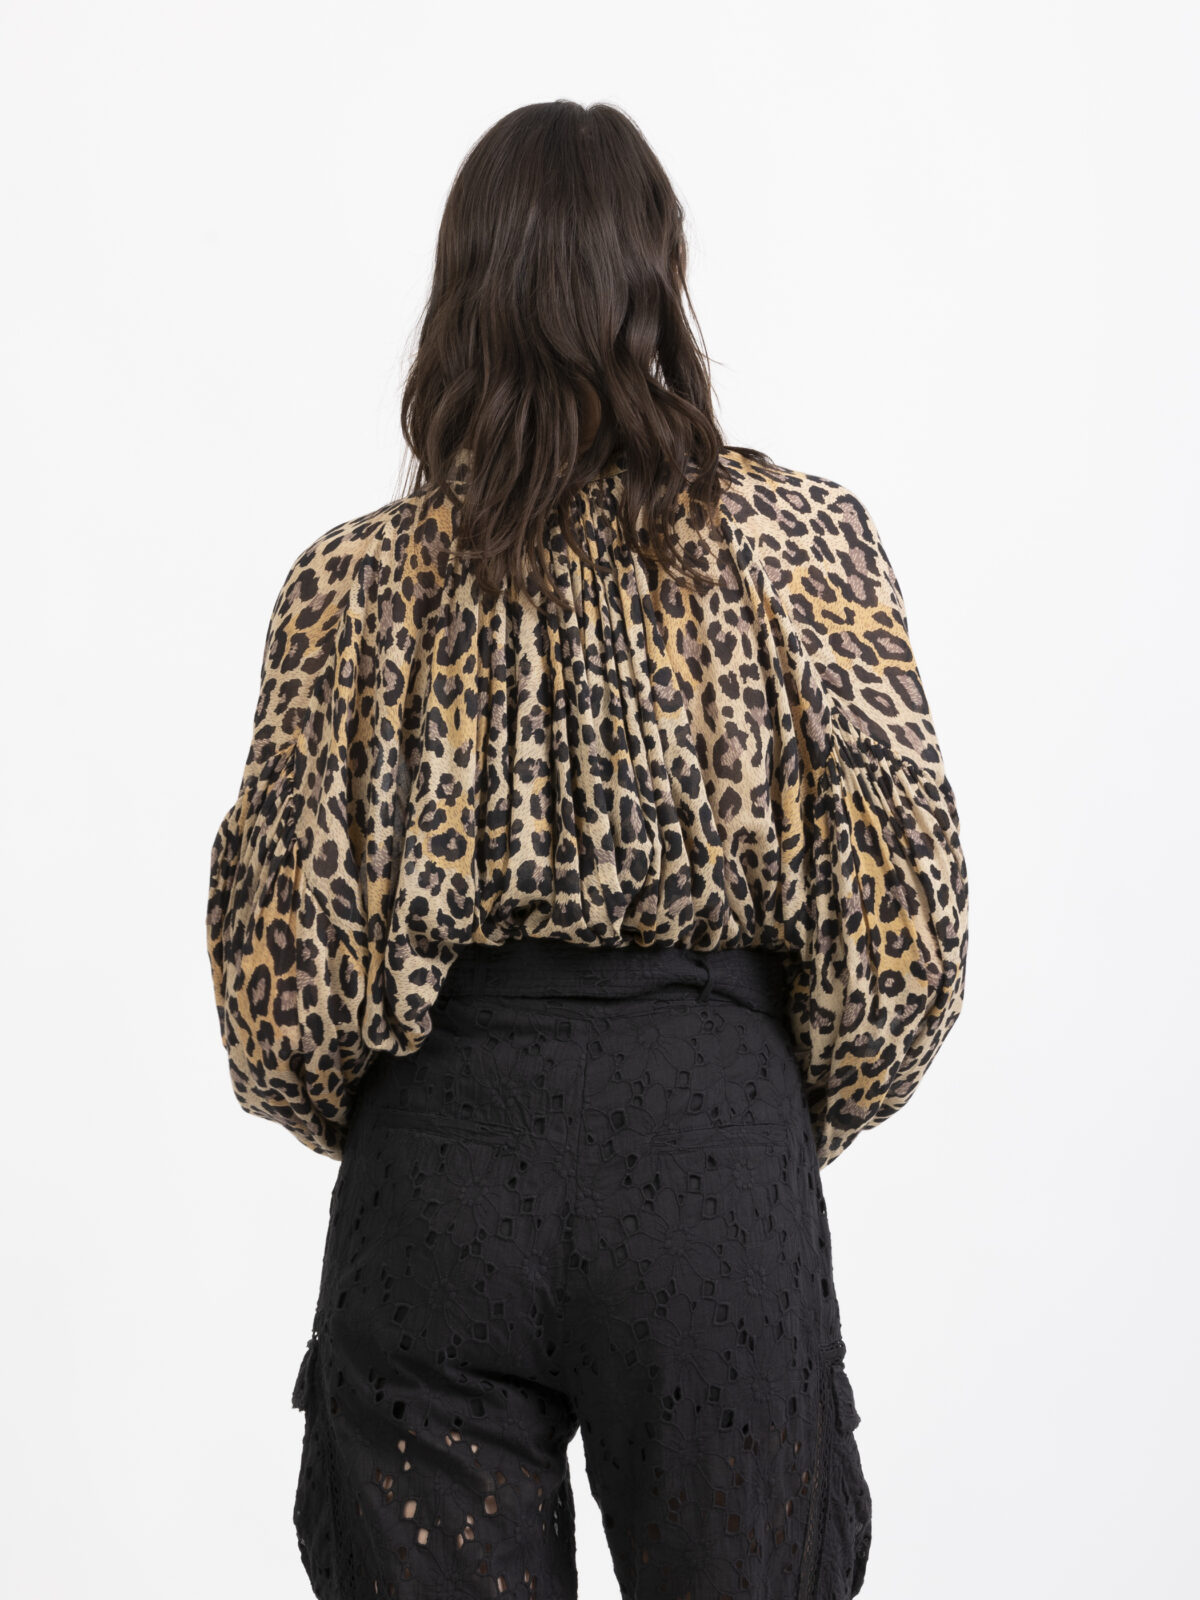 congo-leopard-print-blouse-flowing-puffy-sleeves-laurence-bras-matchboxathens